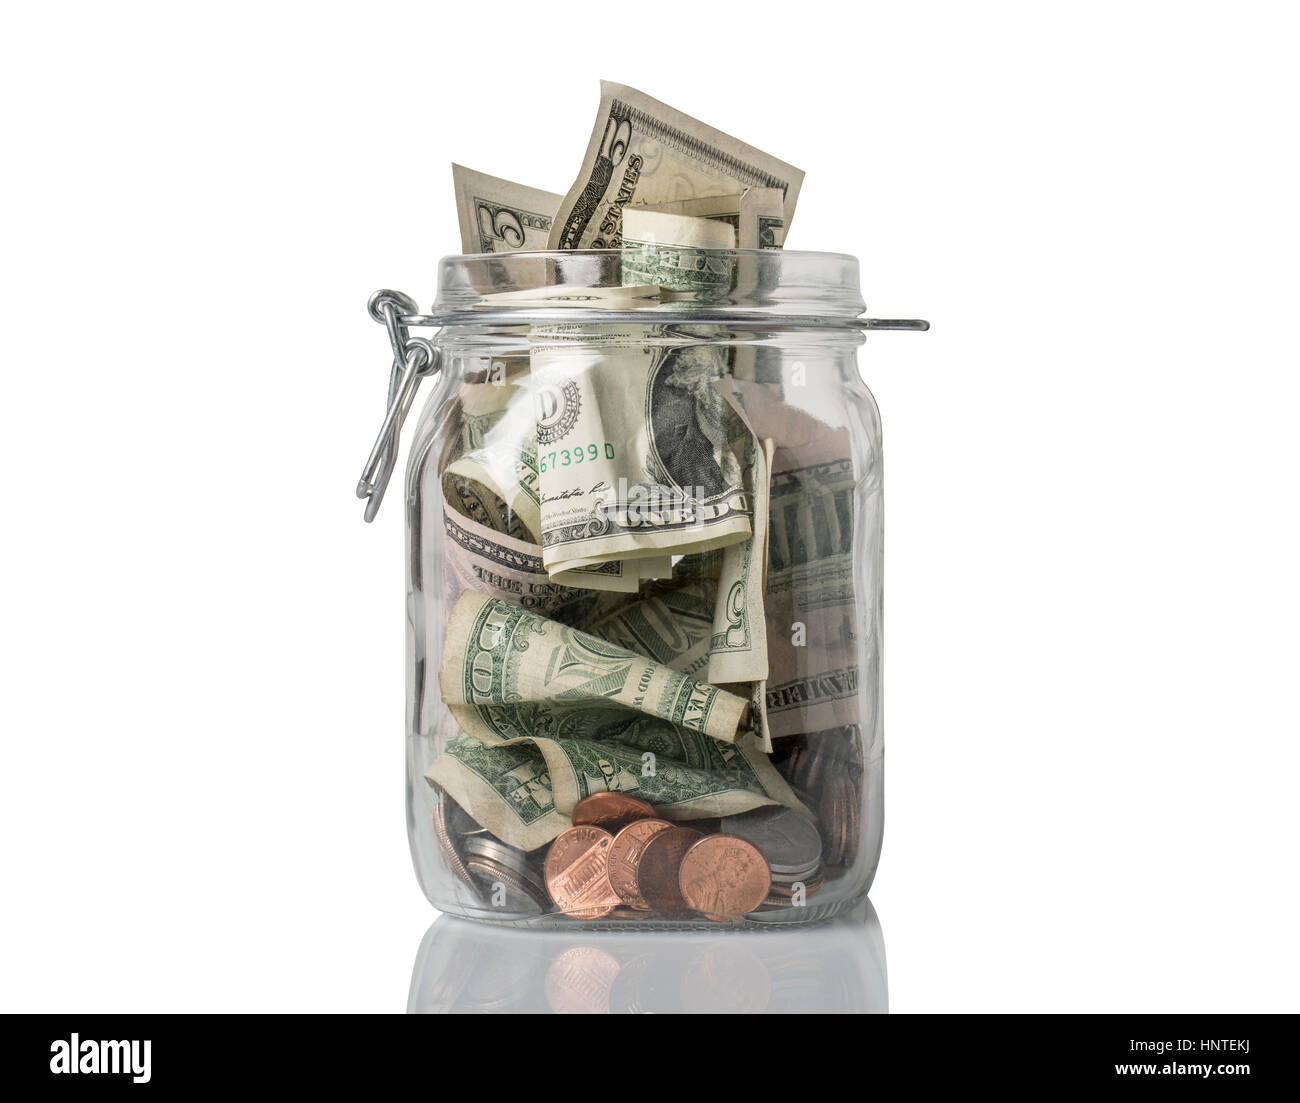 A tip jar or jar for savings filled over the top with American coins